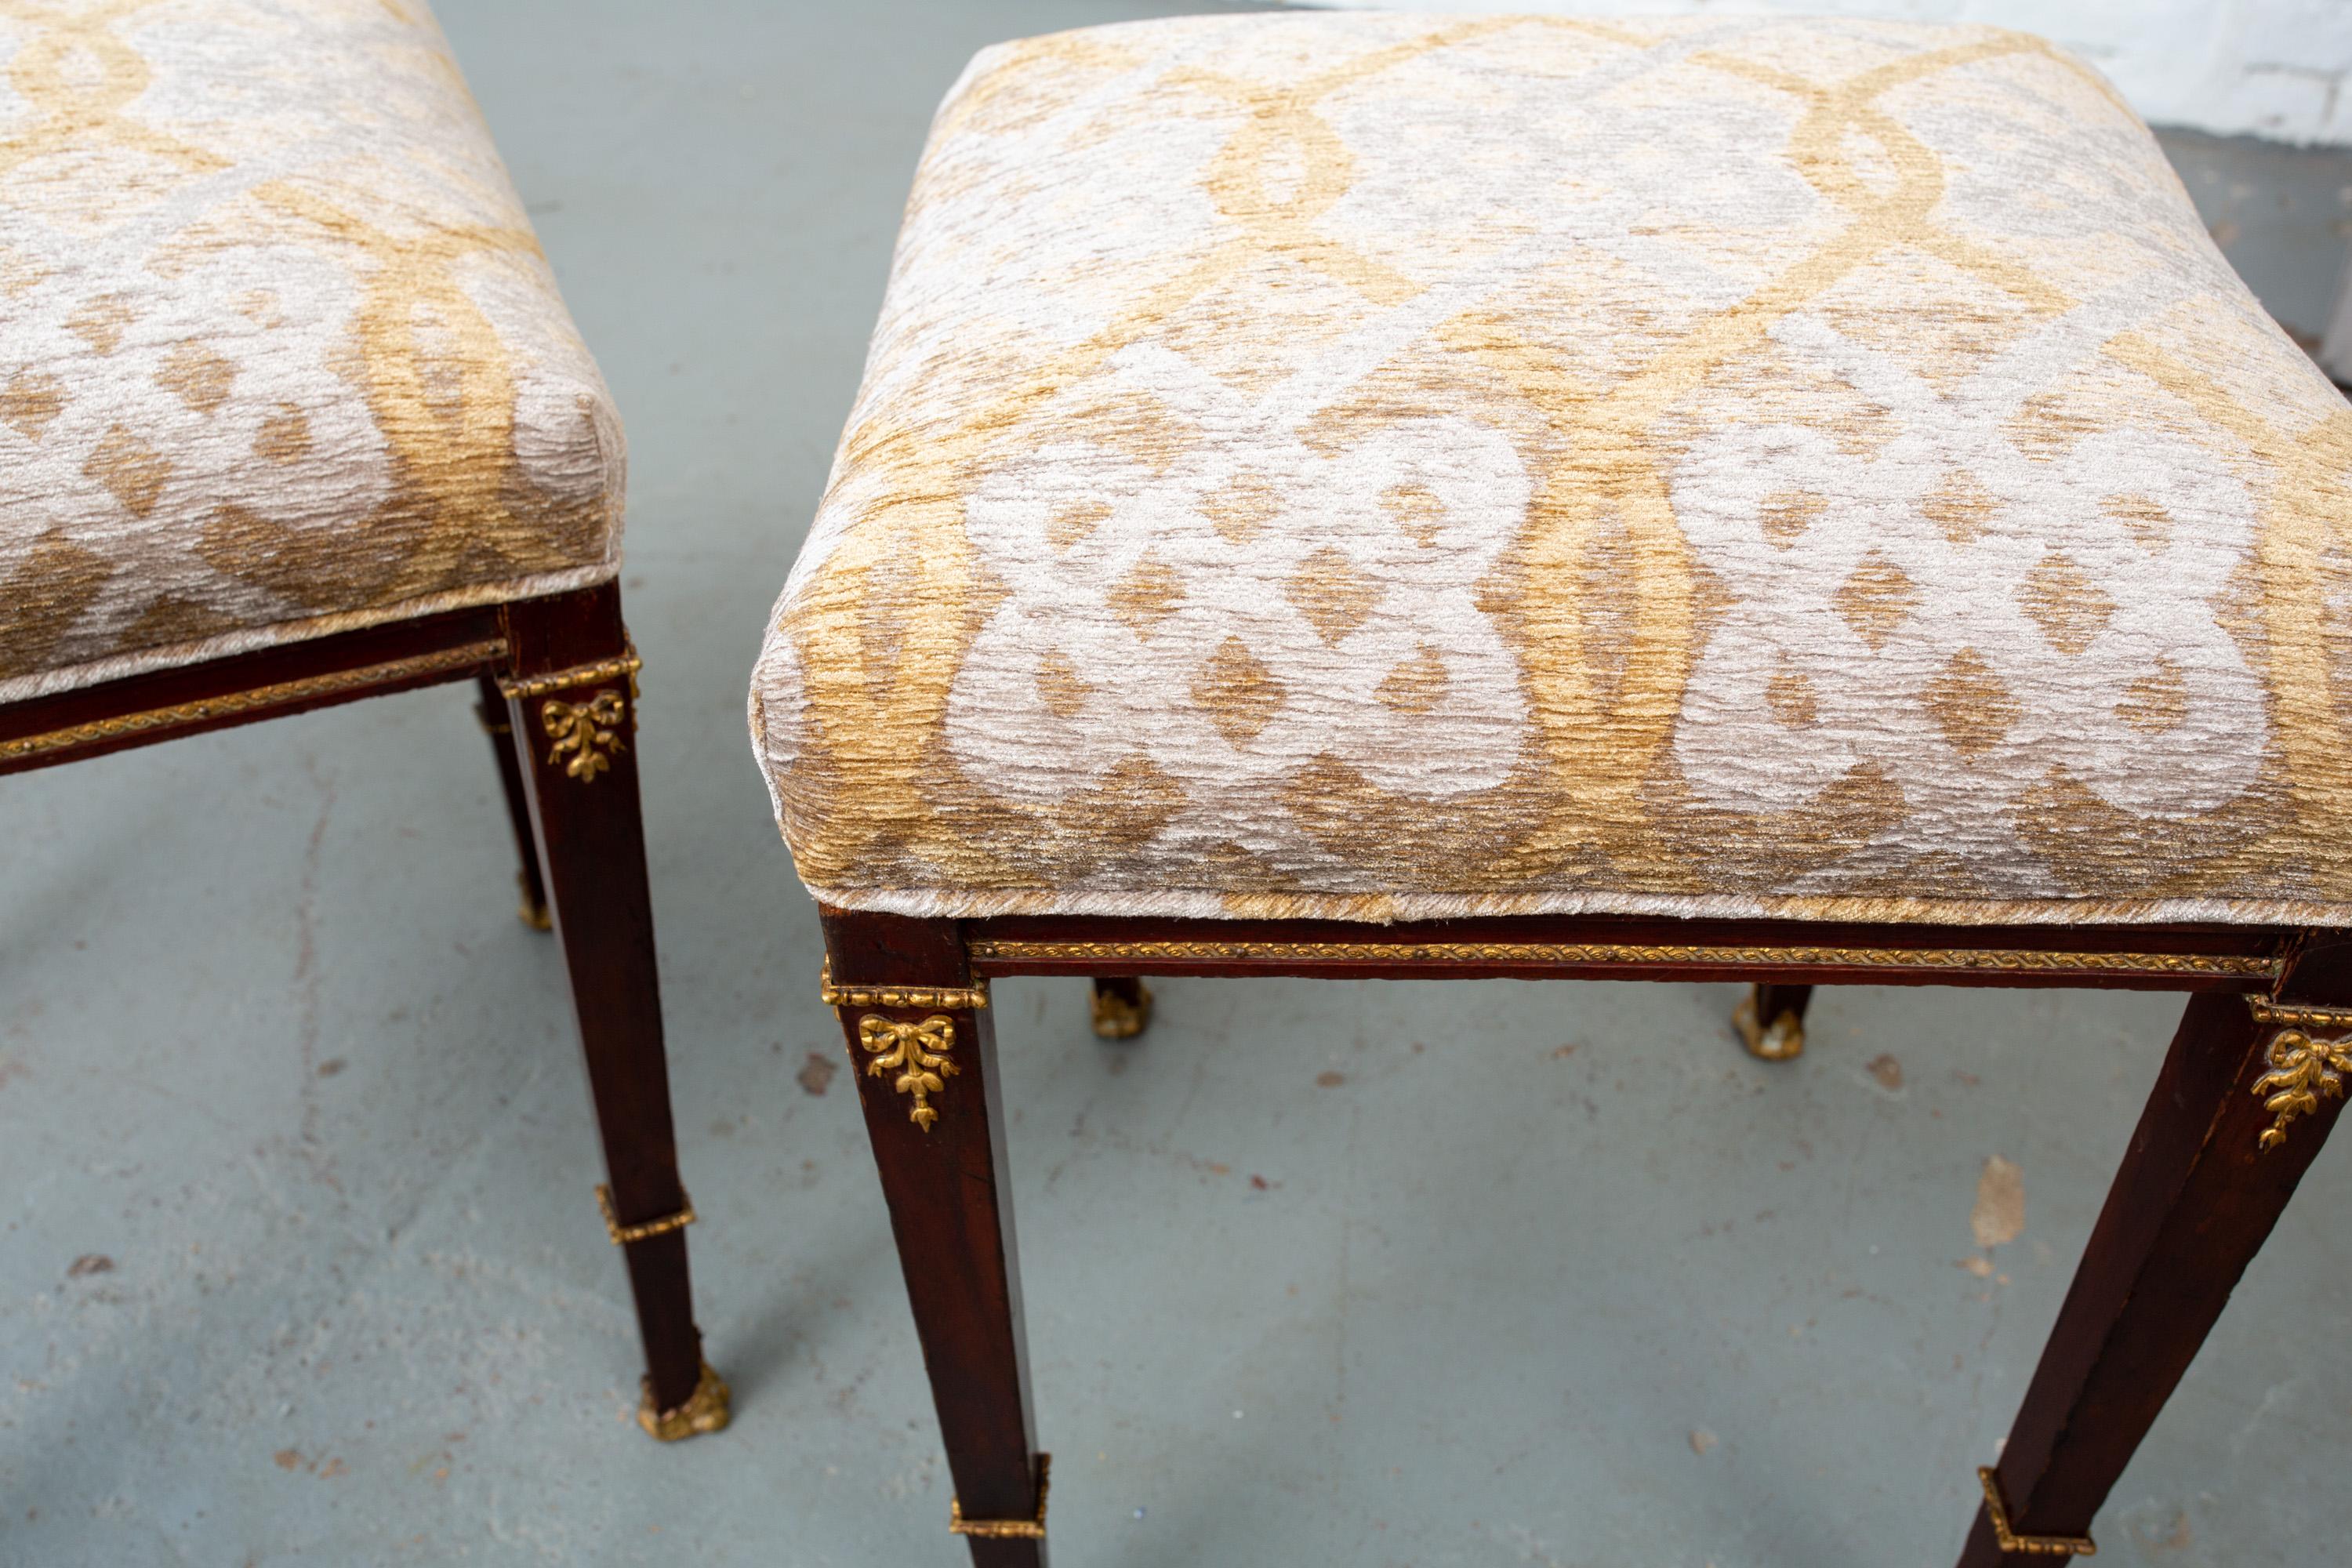 Pair of late 1800s French, neoclassical style foot stools with ormolu mounts and band and bronze claw feet. Newly upholstered. Stools are very structurally sound considering their age.